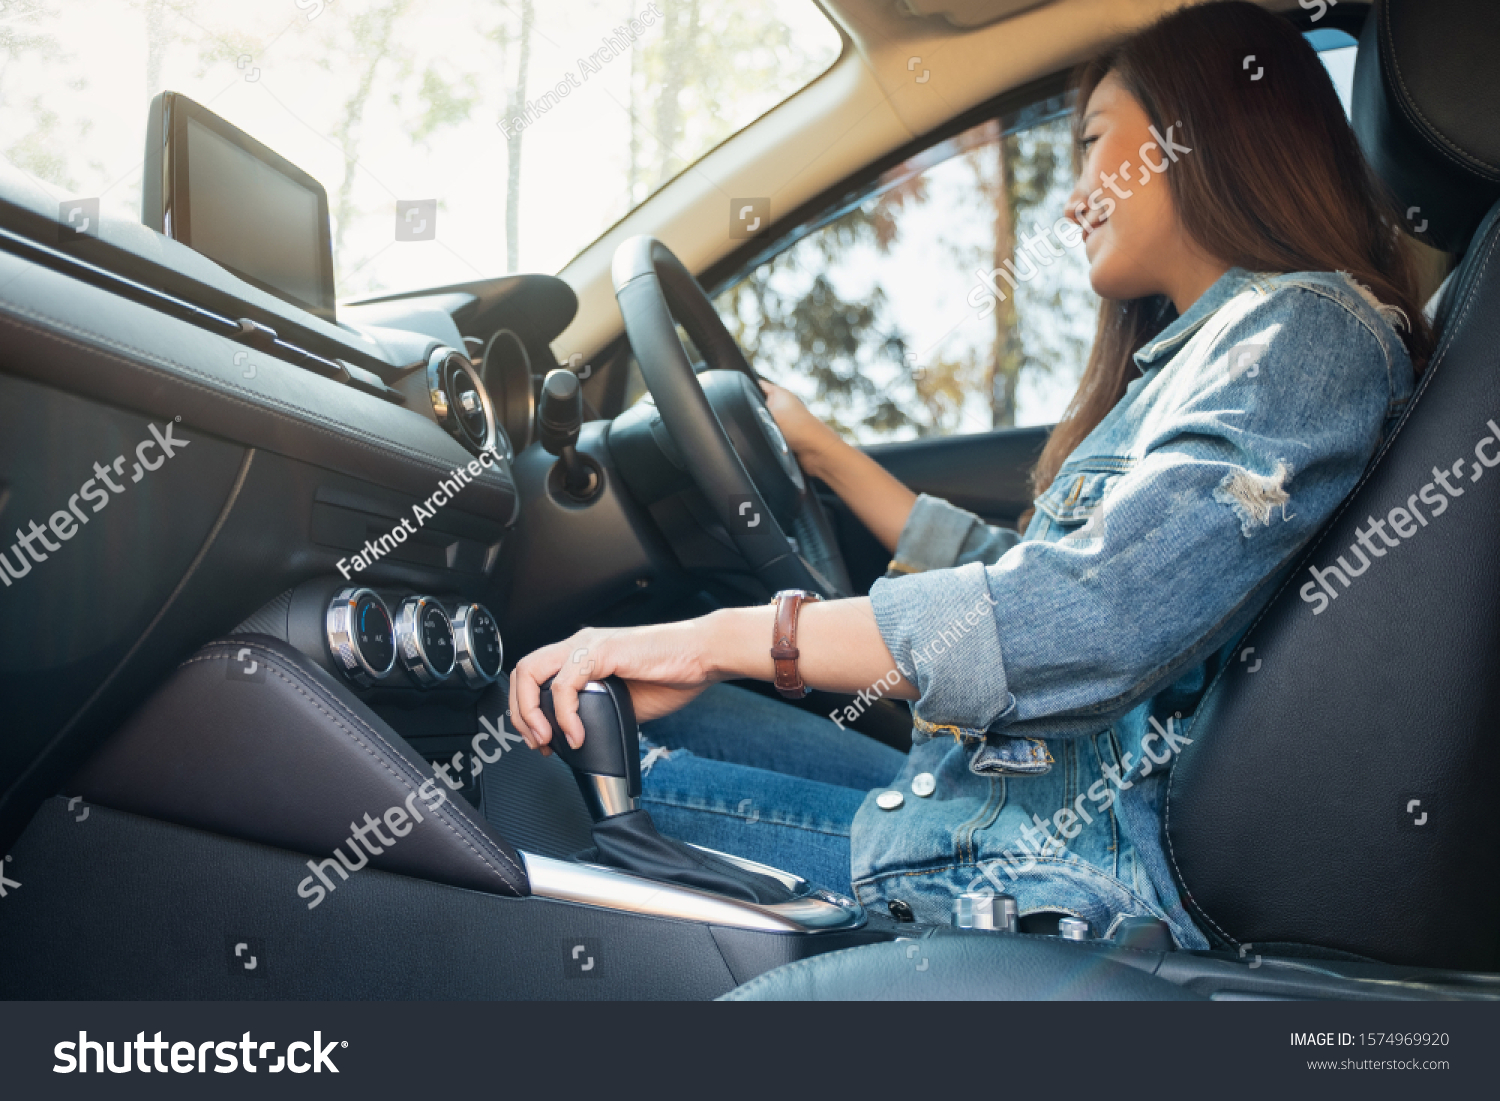 Closeup Image Female Driver Shifting Automatic Stock Photo Edit Now 1574969920